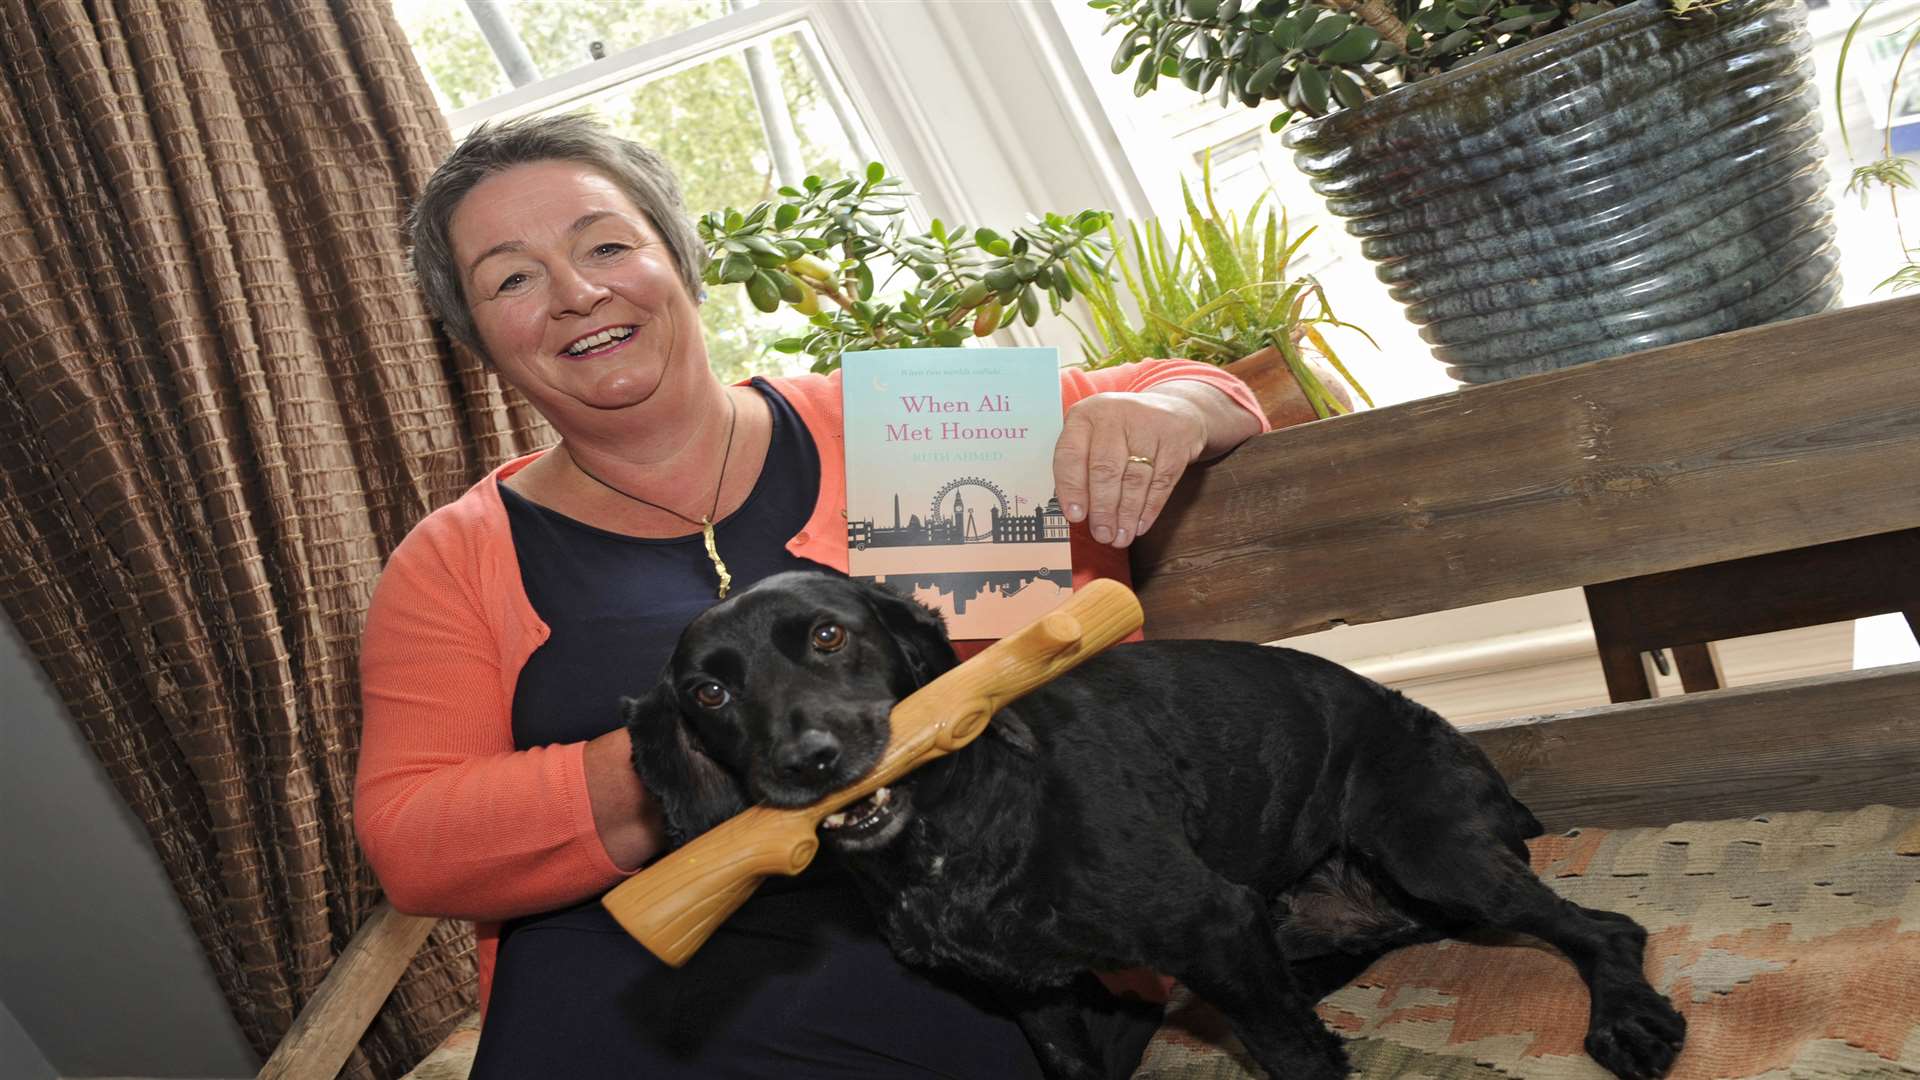 Victoria Road, Deal. Local author Anstey Spraggan with her dog Iggy